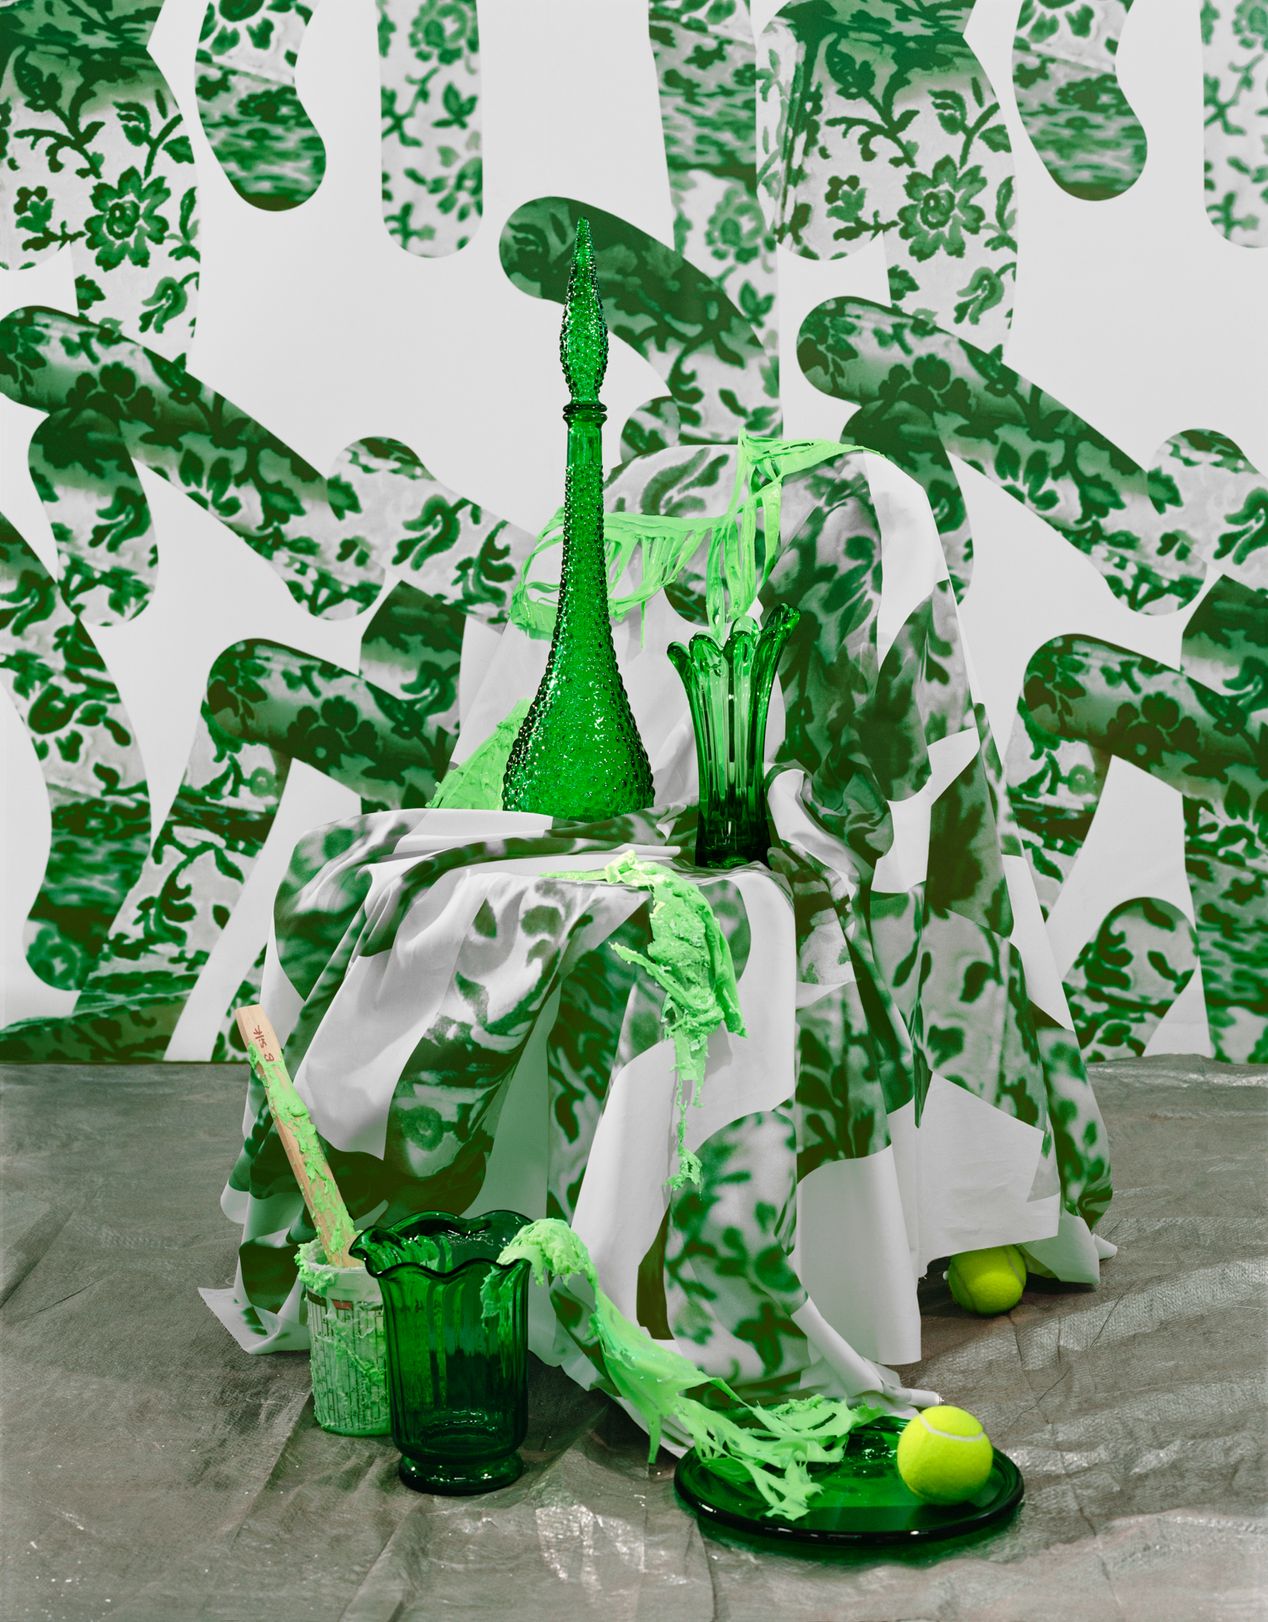 A still life with green glass vases and green patterned fabric and wallpaper, art photography, Ilona Szwarc, contemporary Los Angeles artist.